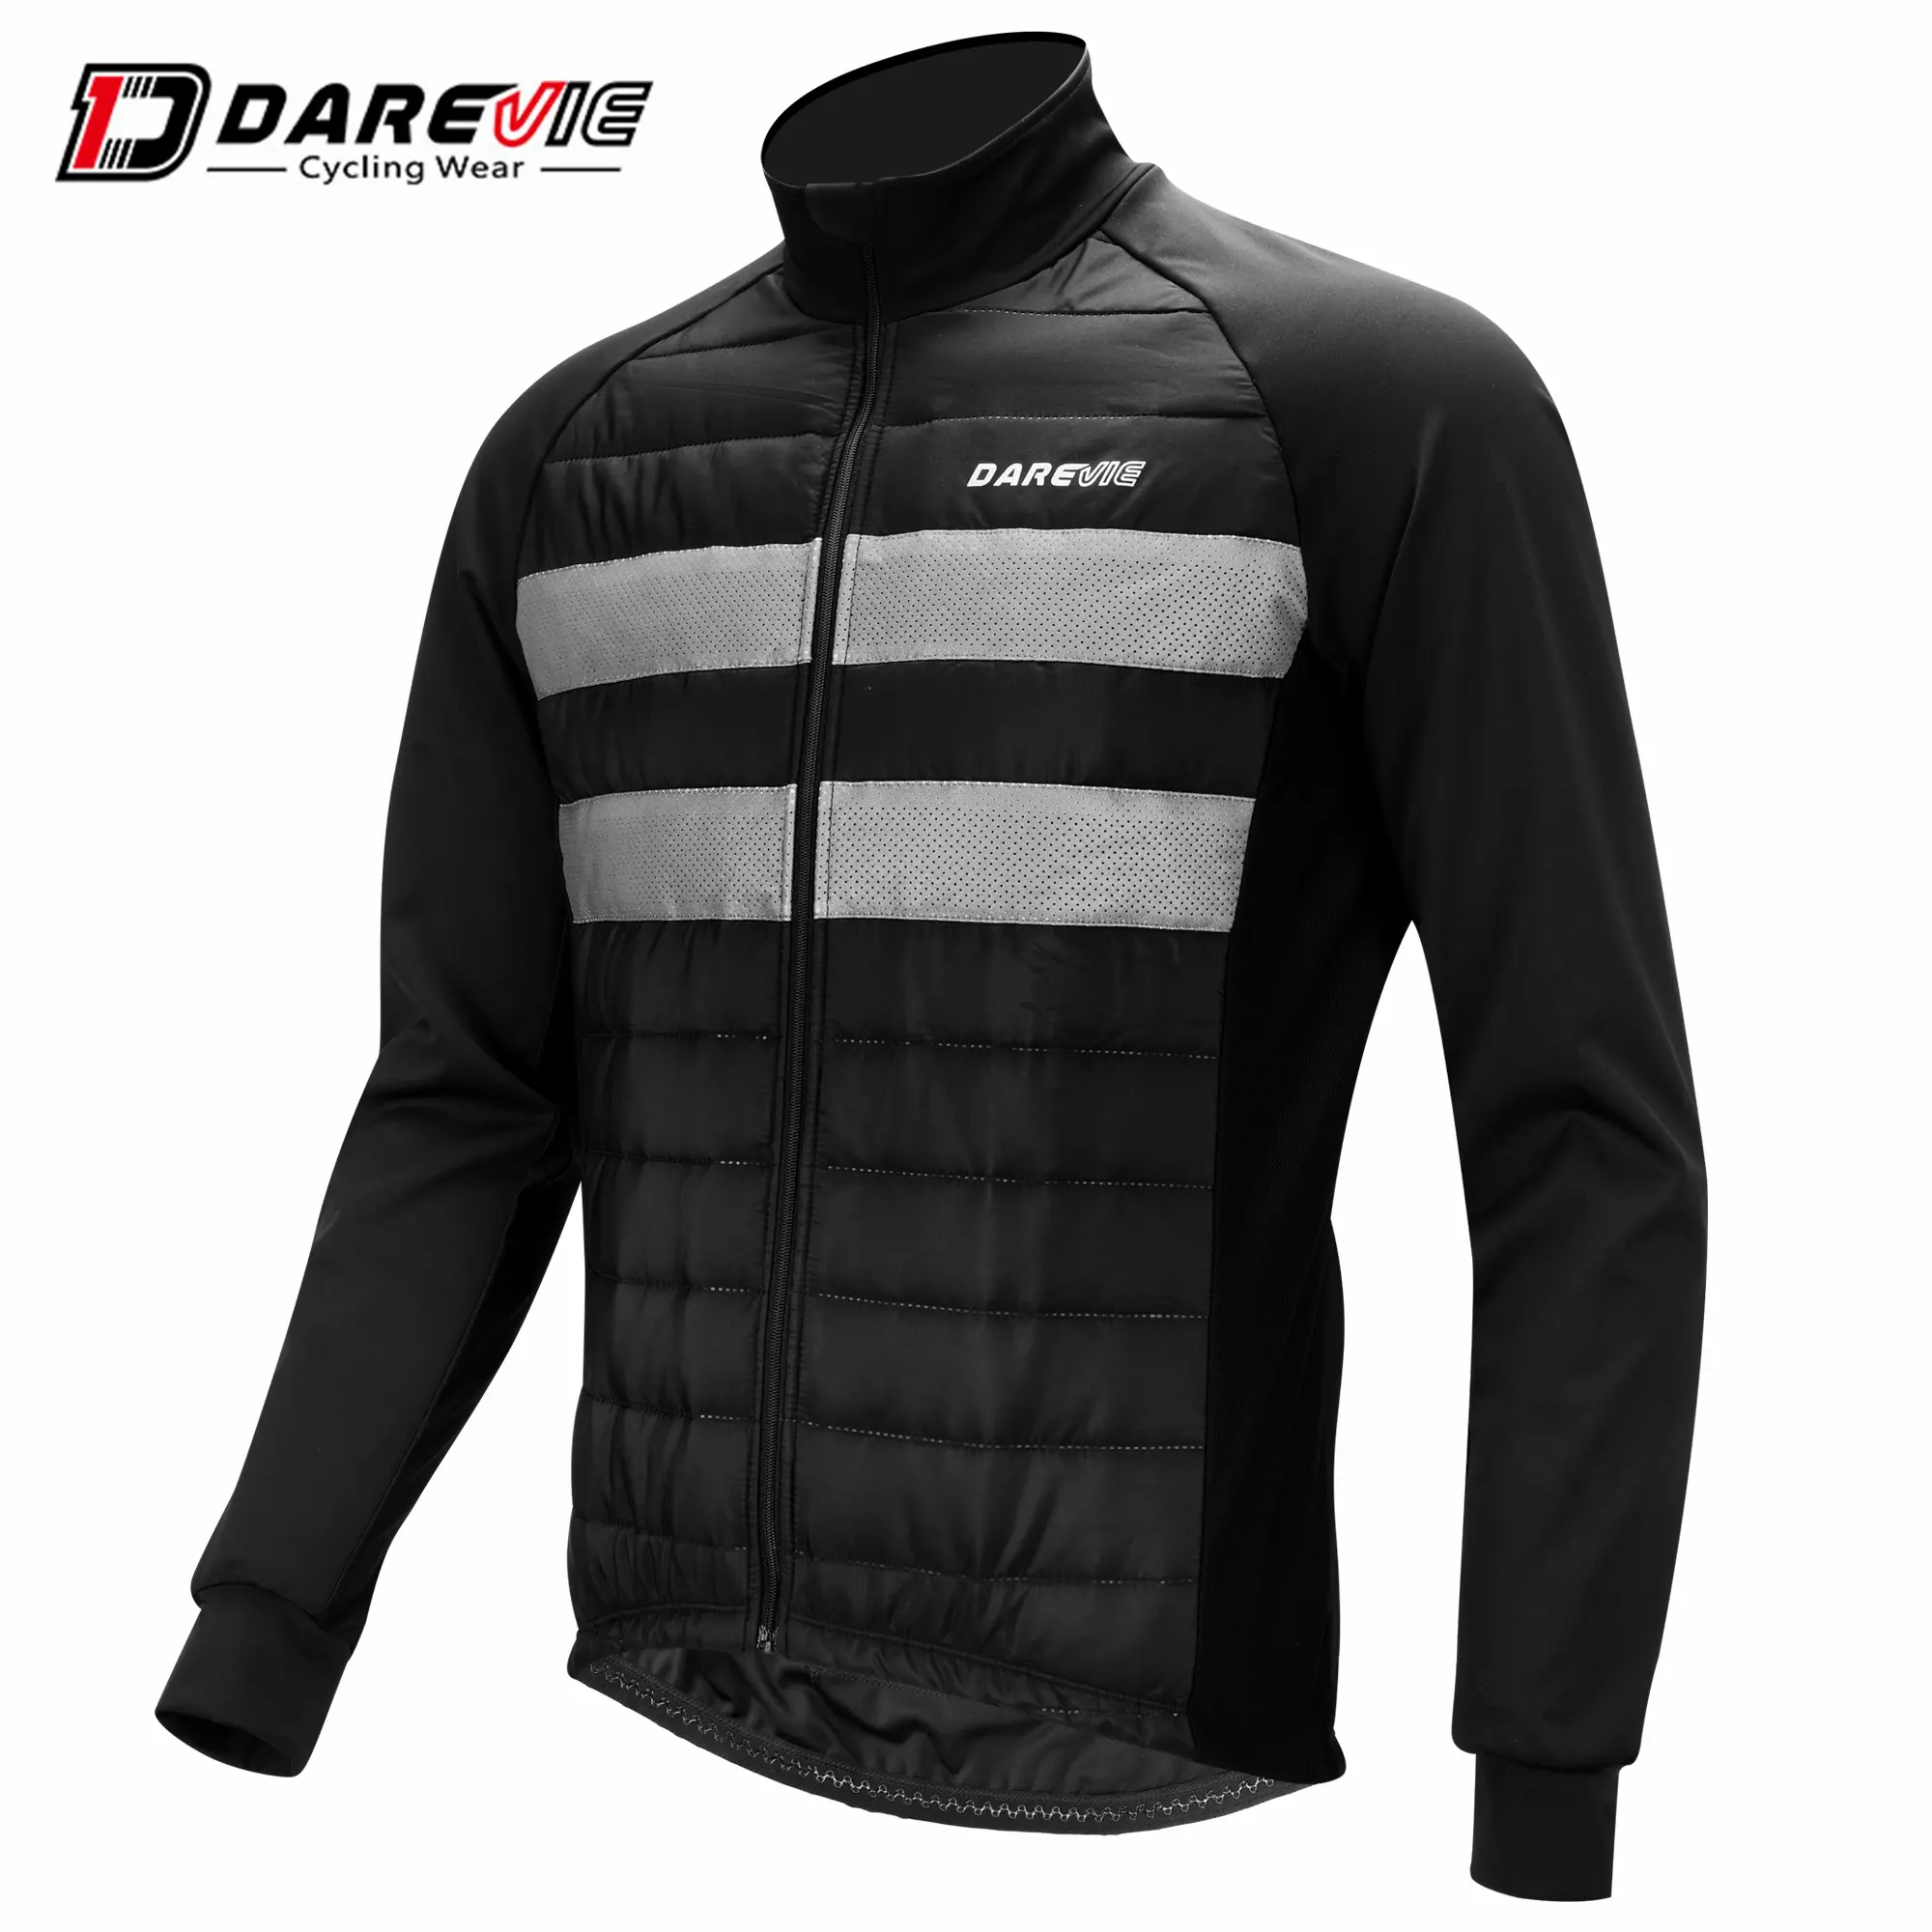 Darevie designed customized long sleeves down draft sports men winter reflective cycling jacket